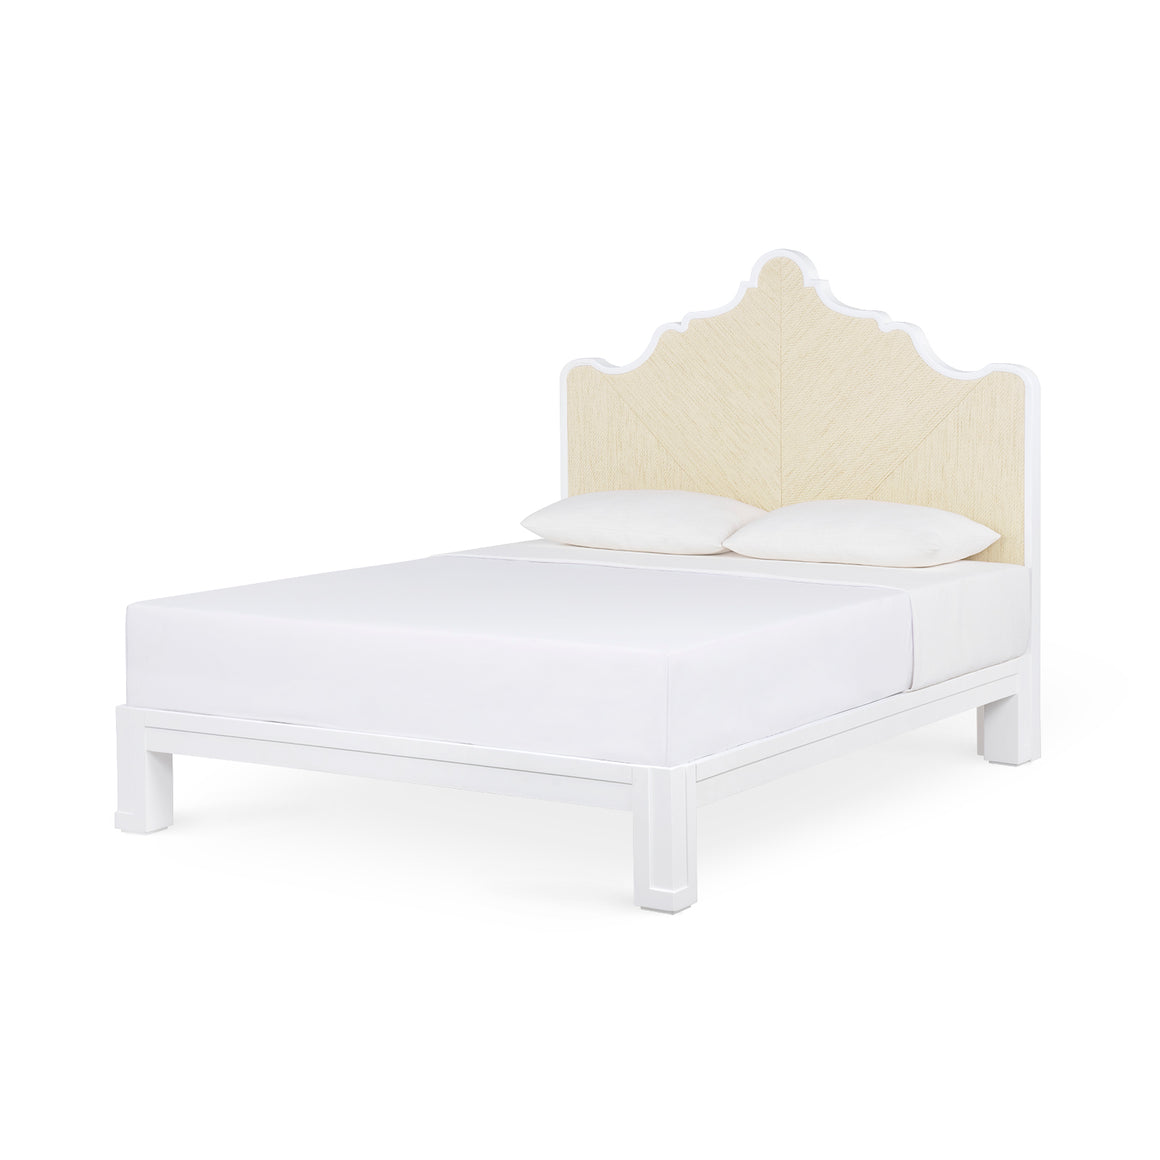 Victoria Queen Headboard With Bed Frame, Natural Twill, Vanilla | Victoria Collection | Villa & House